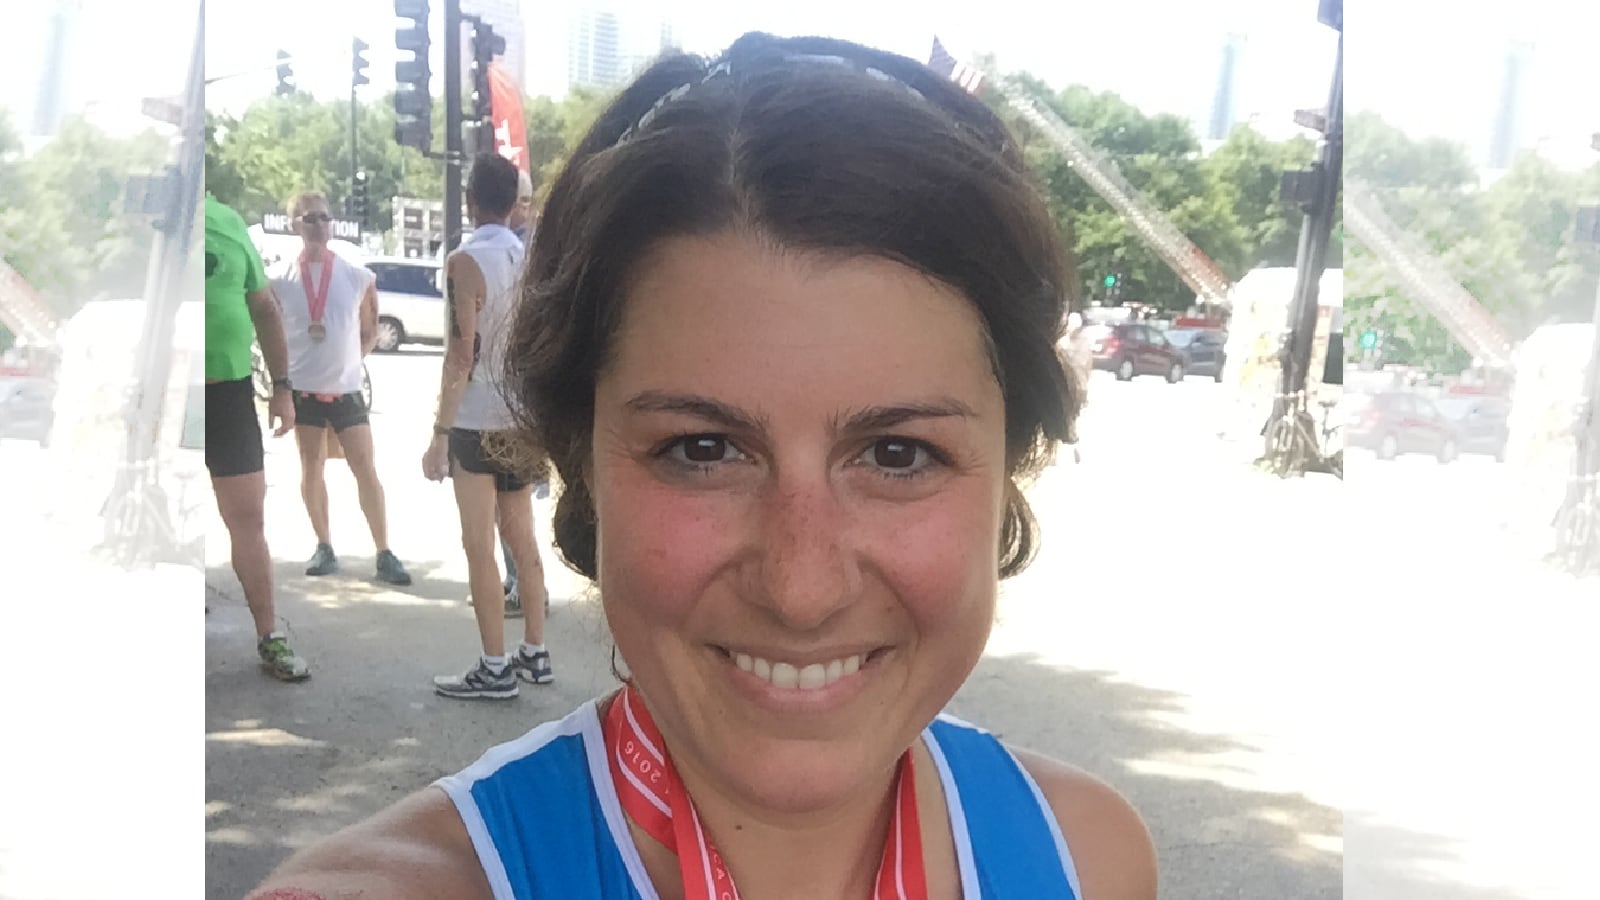 "My favorite professor gave me an important piece of advice to live by: 'If you don’t take care of yourself, you cannot take care of others.'" Running is one of Lisa Caputo Love's non-teaching hobbies.